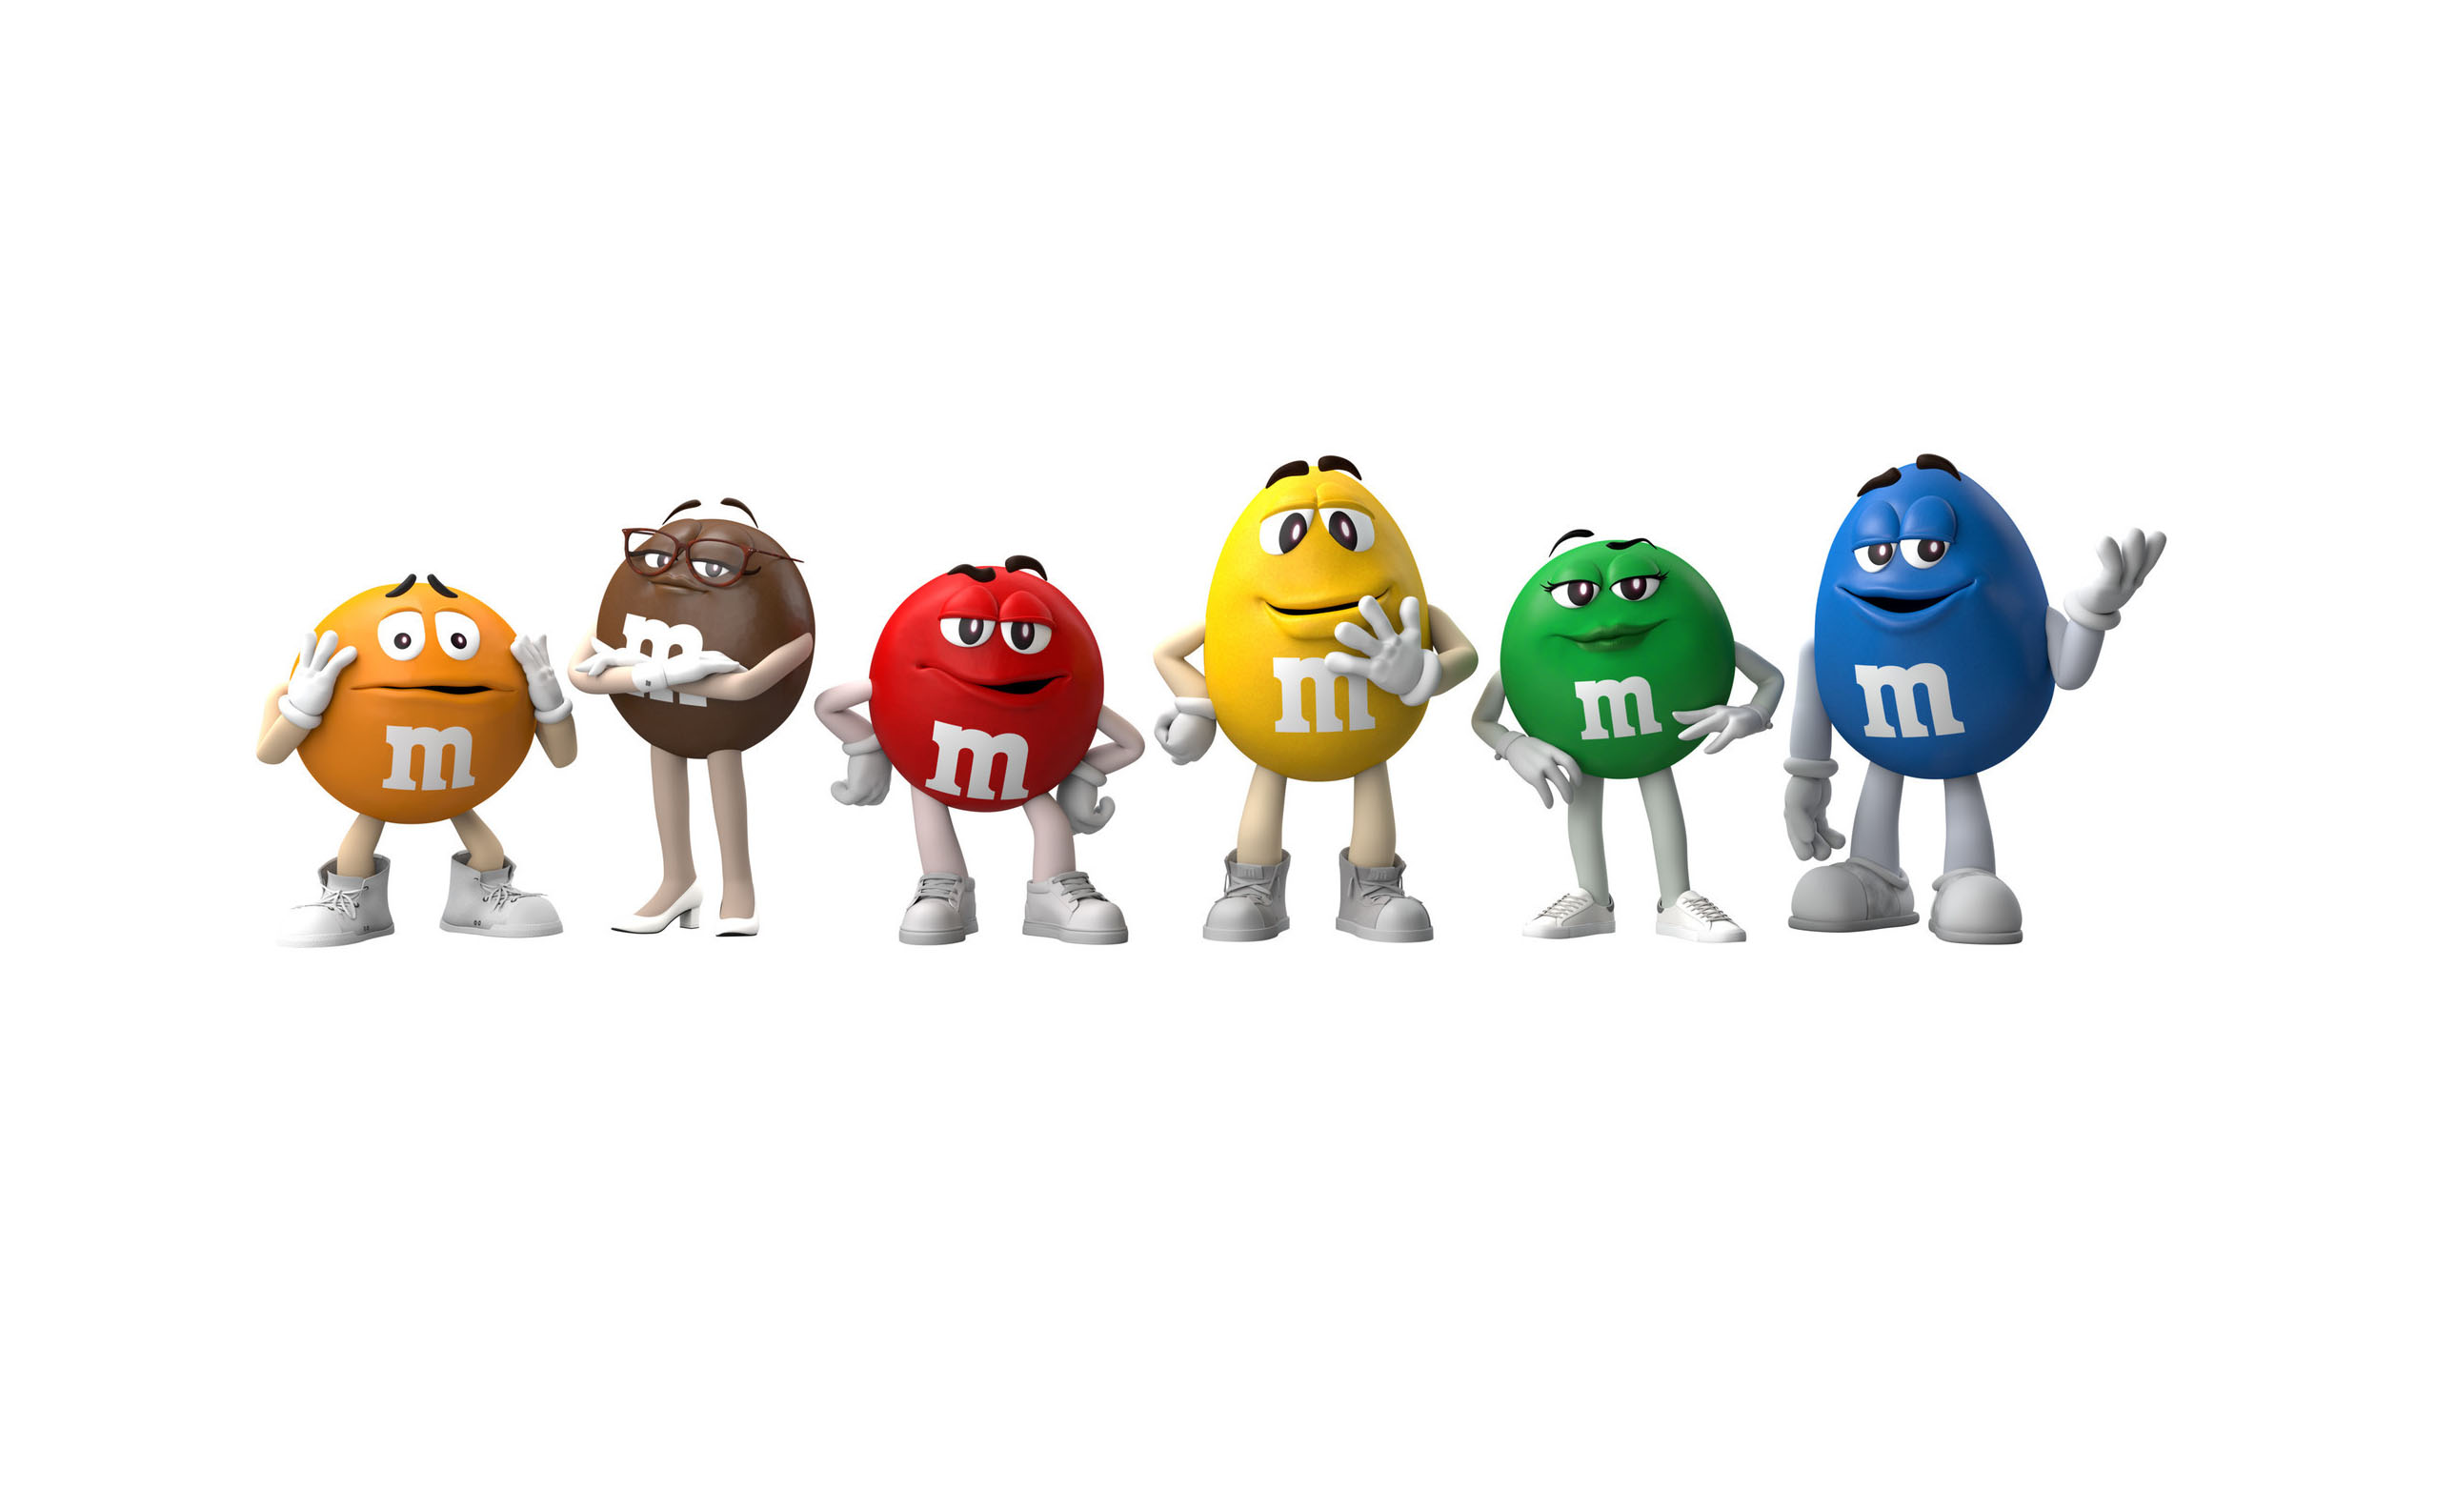 M&amp;M’S has evolved its beloved characters’ personalities and backstories to be more representative of today’s society and created a fresh, modern take on their looks to underscore the importance of self-expression and power of community.